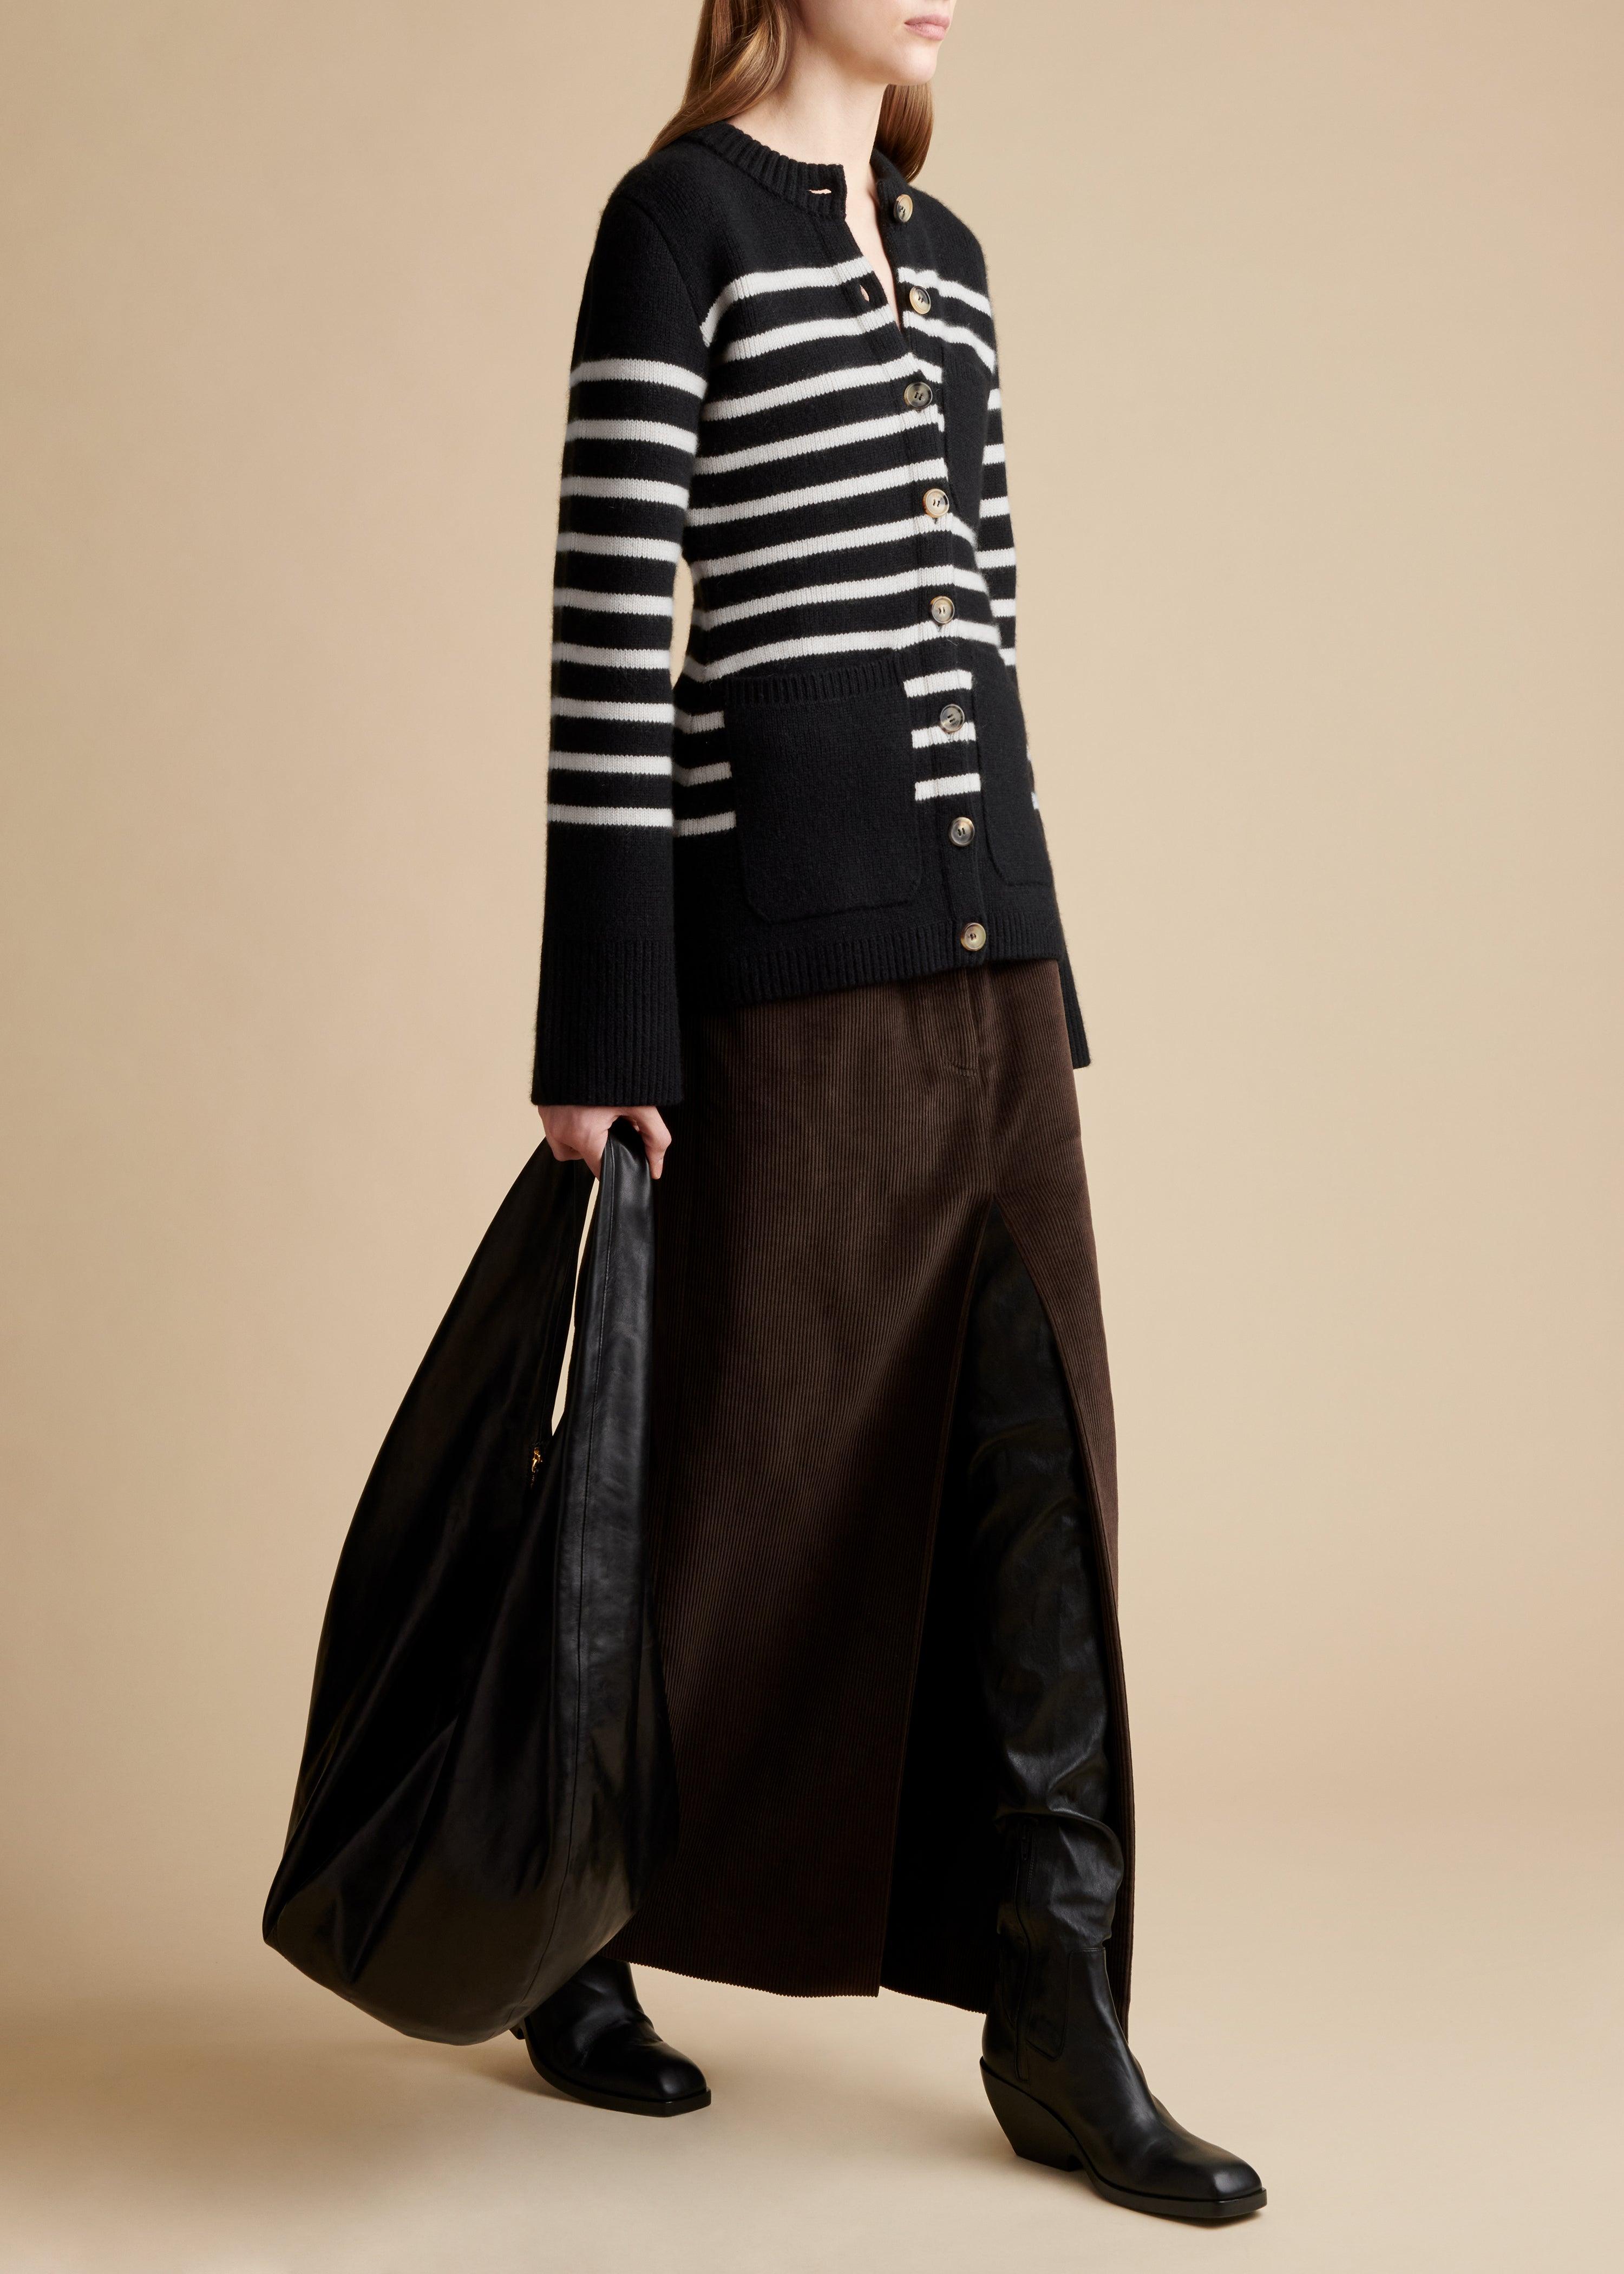 The Suzette Cardigan in Black and White Stripe - The Iconic Issue